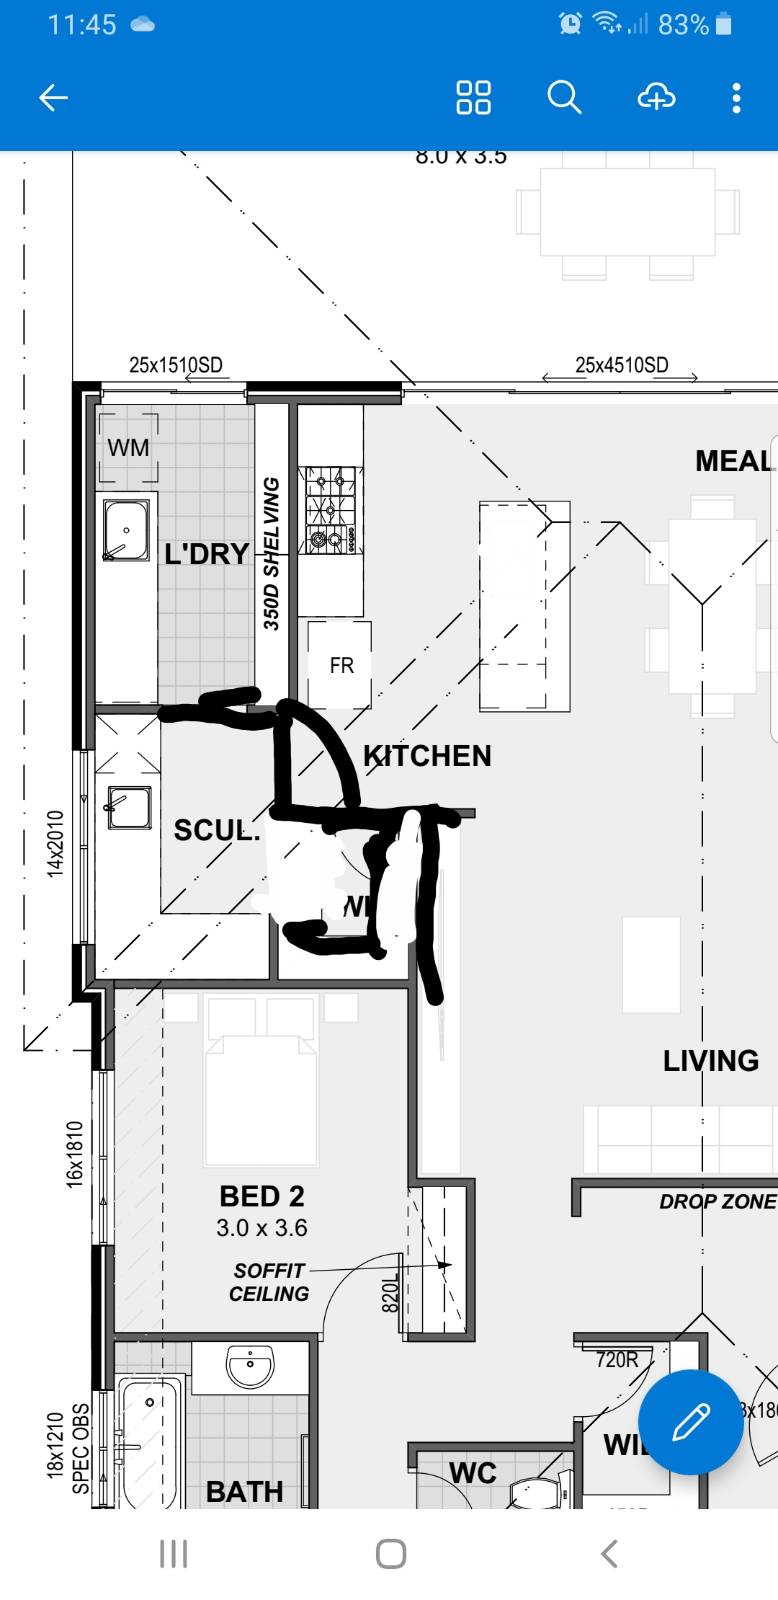 Advice for a functional kitchen/scullery